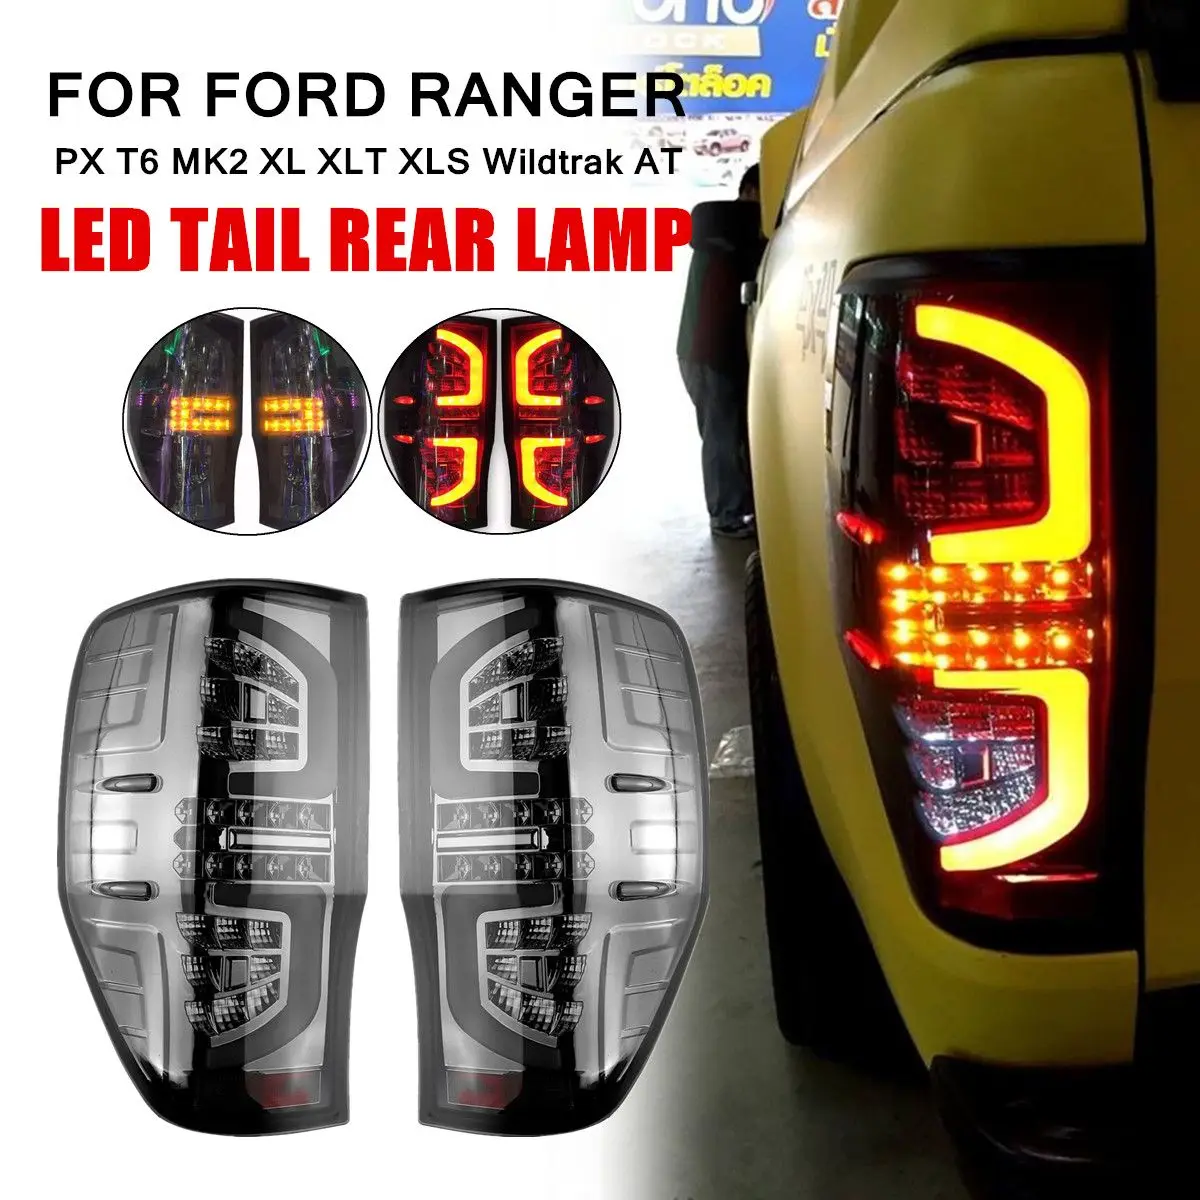 

1Pair Rear Tail Lights Lamp for Ford Ranger PX T6 MK2 XL XLT XLS Wildtrak AT Smoked LED Making Installation Breeze Match Factory